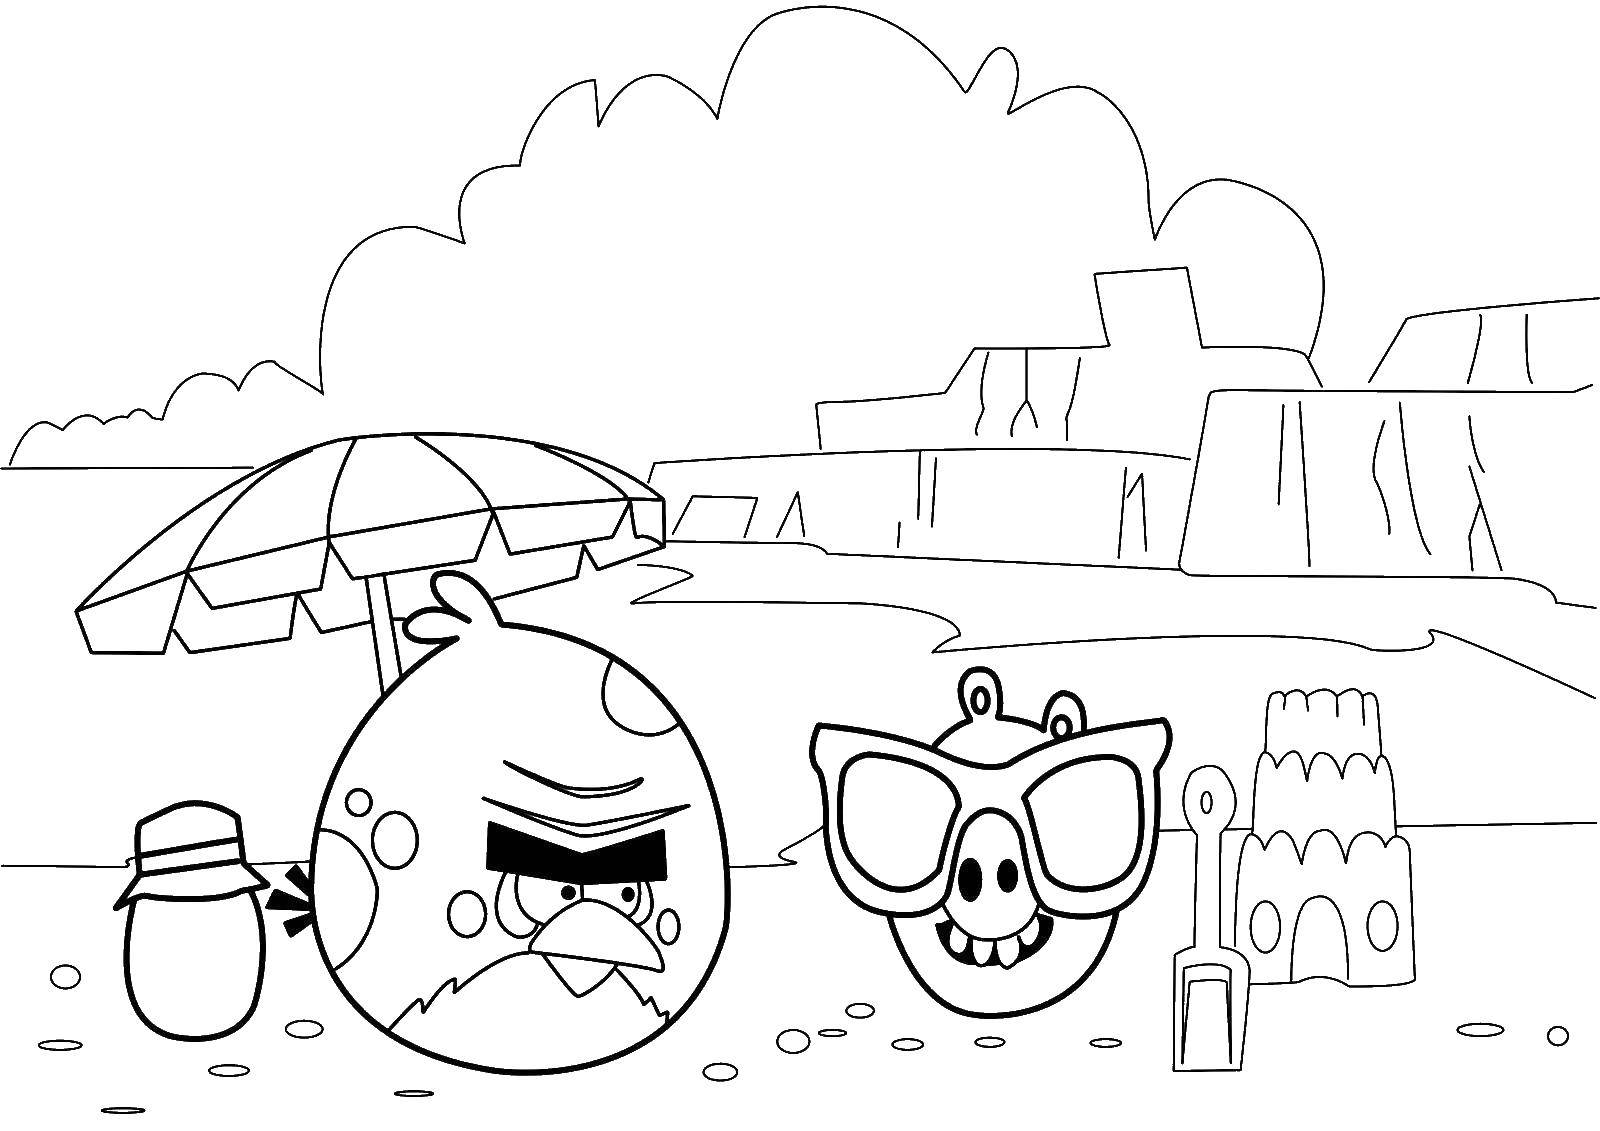 Coloring  angry birds . Category angry birds. Tags:  Games, Angry Birds .